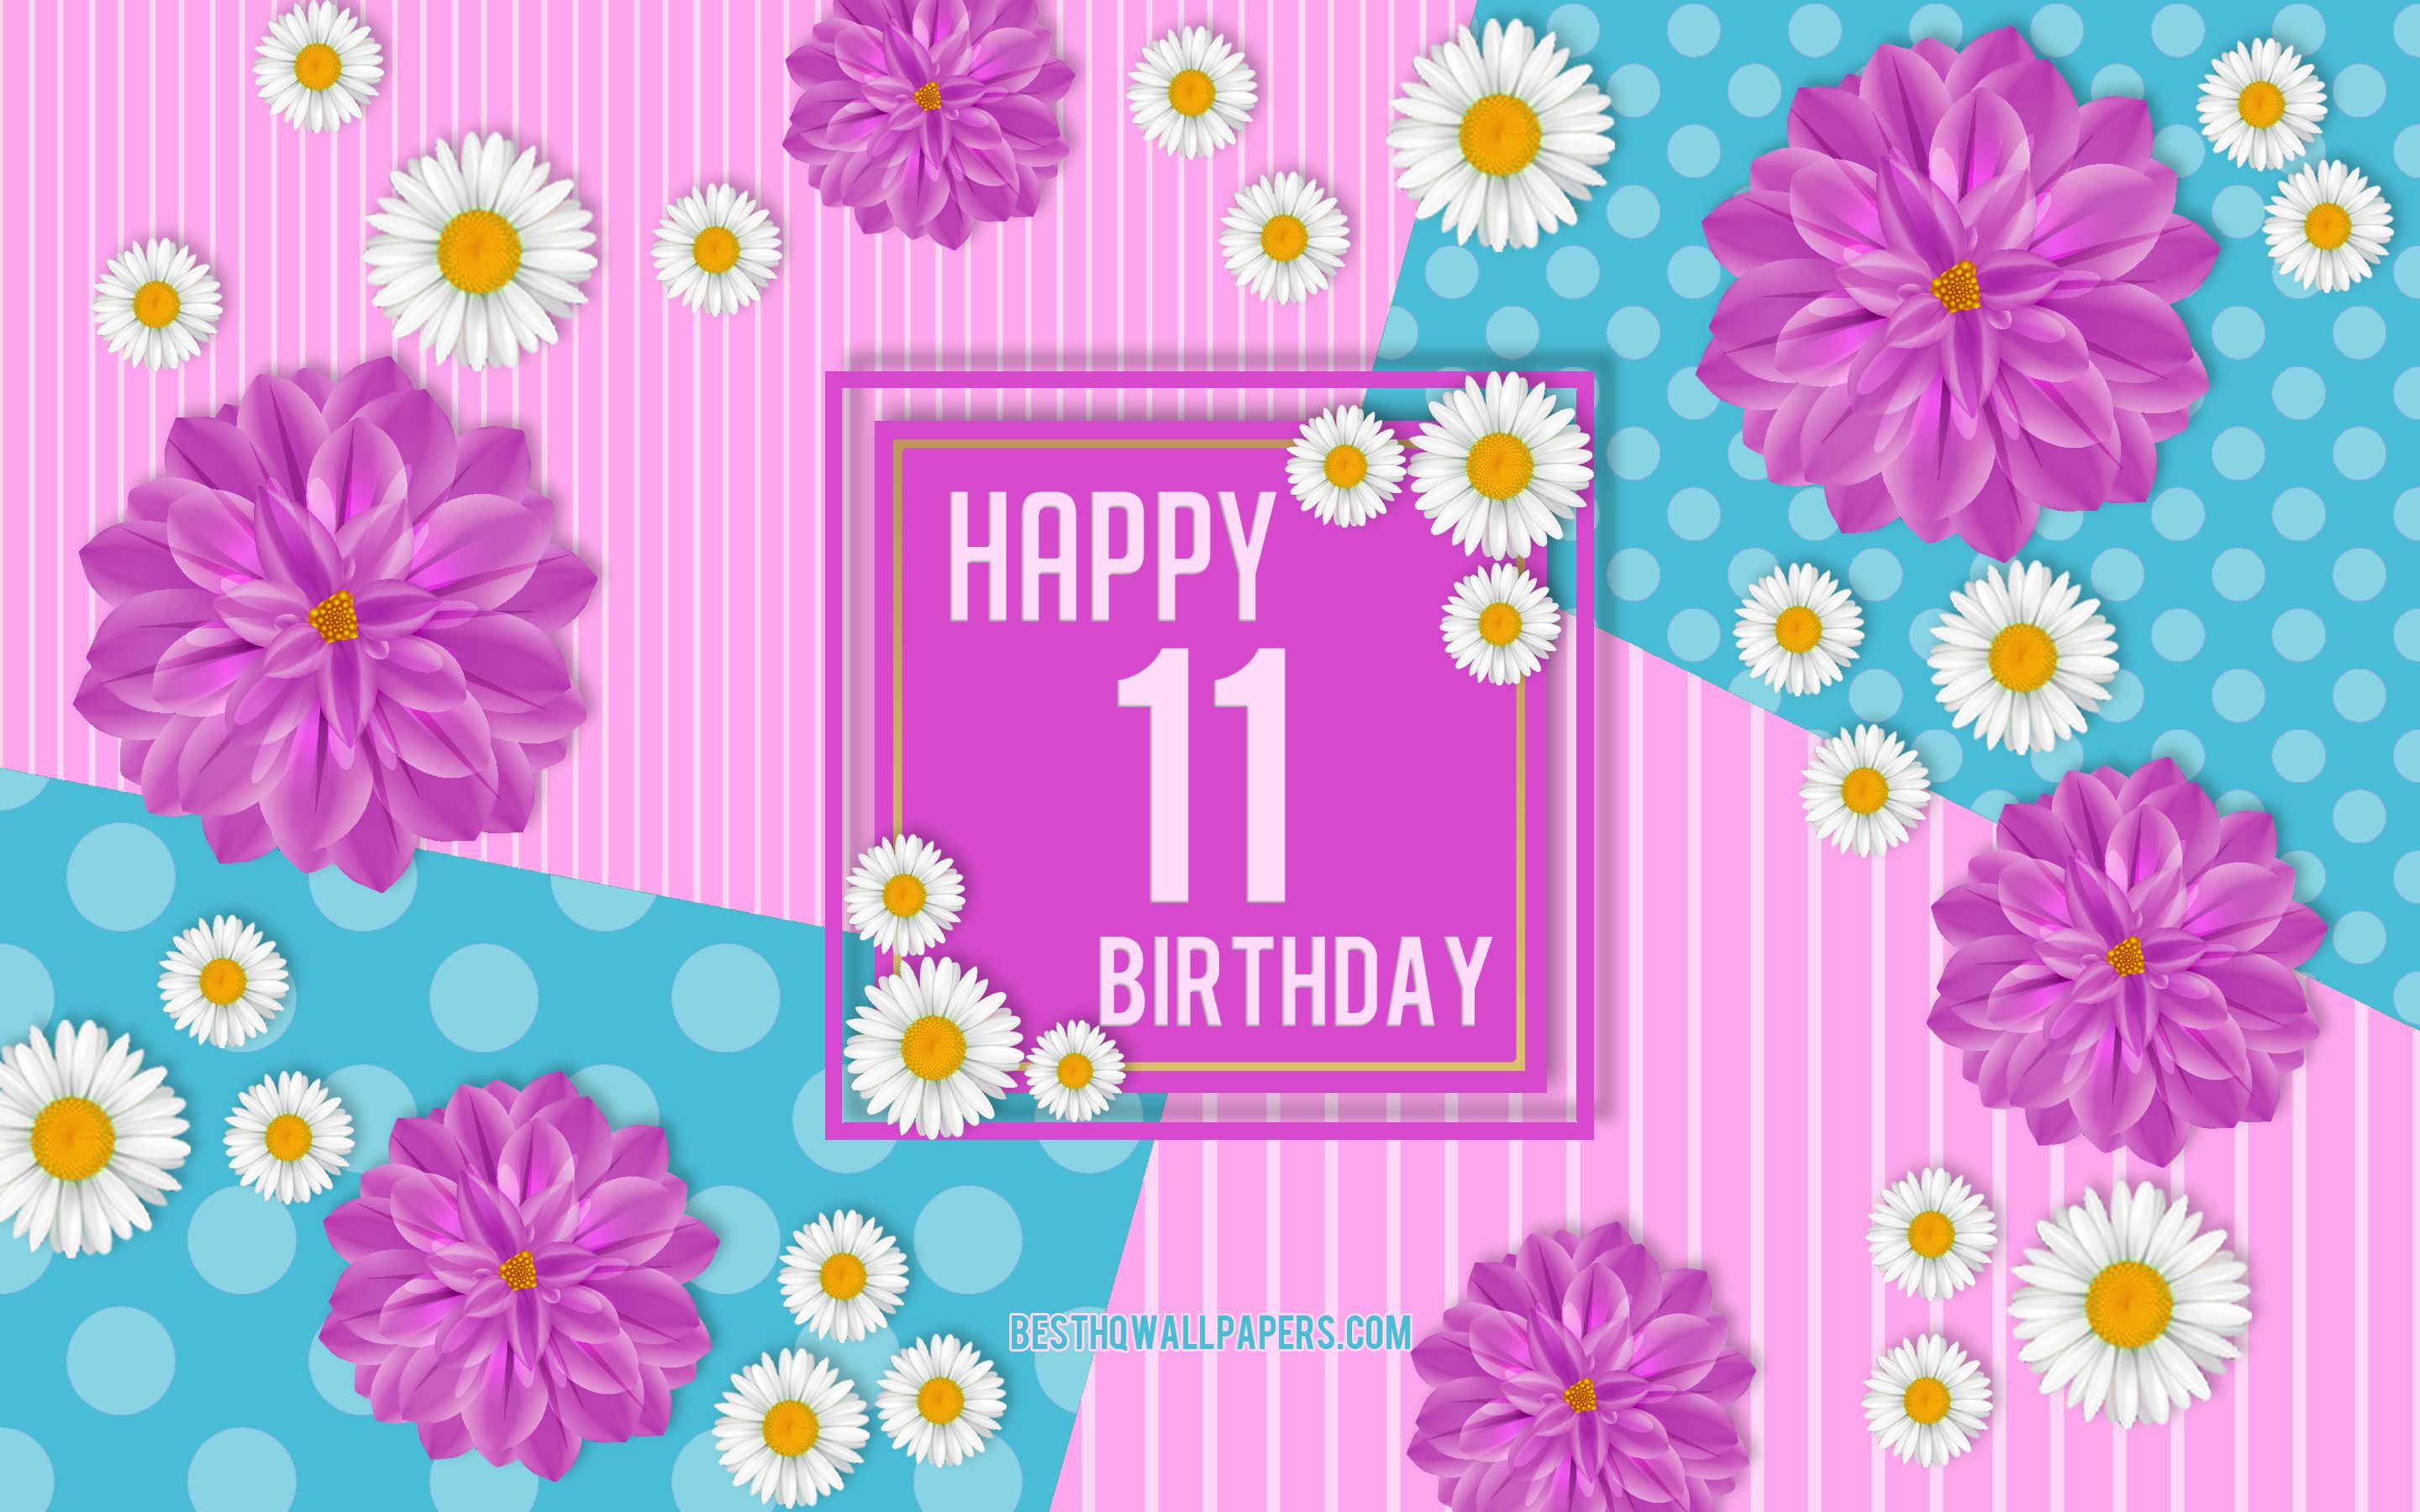 Download wallpaper 11th Happy Birthday, Spring Birthday Background, Happy 11th Birthday, Happy 11 Years Birthday, Birthday flowers background, 11 Years Birthday, 11 Years Birthday party for desktop with resolution 2880x1800. High Quality